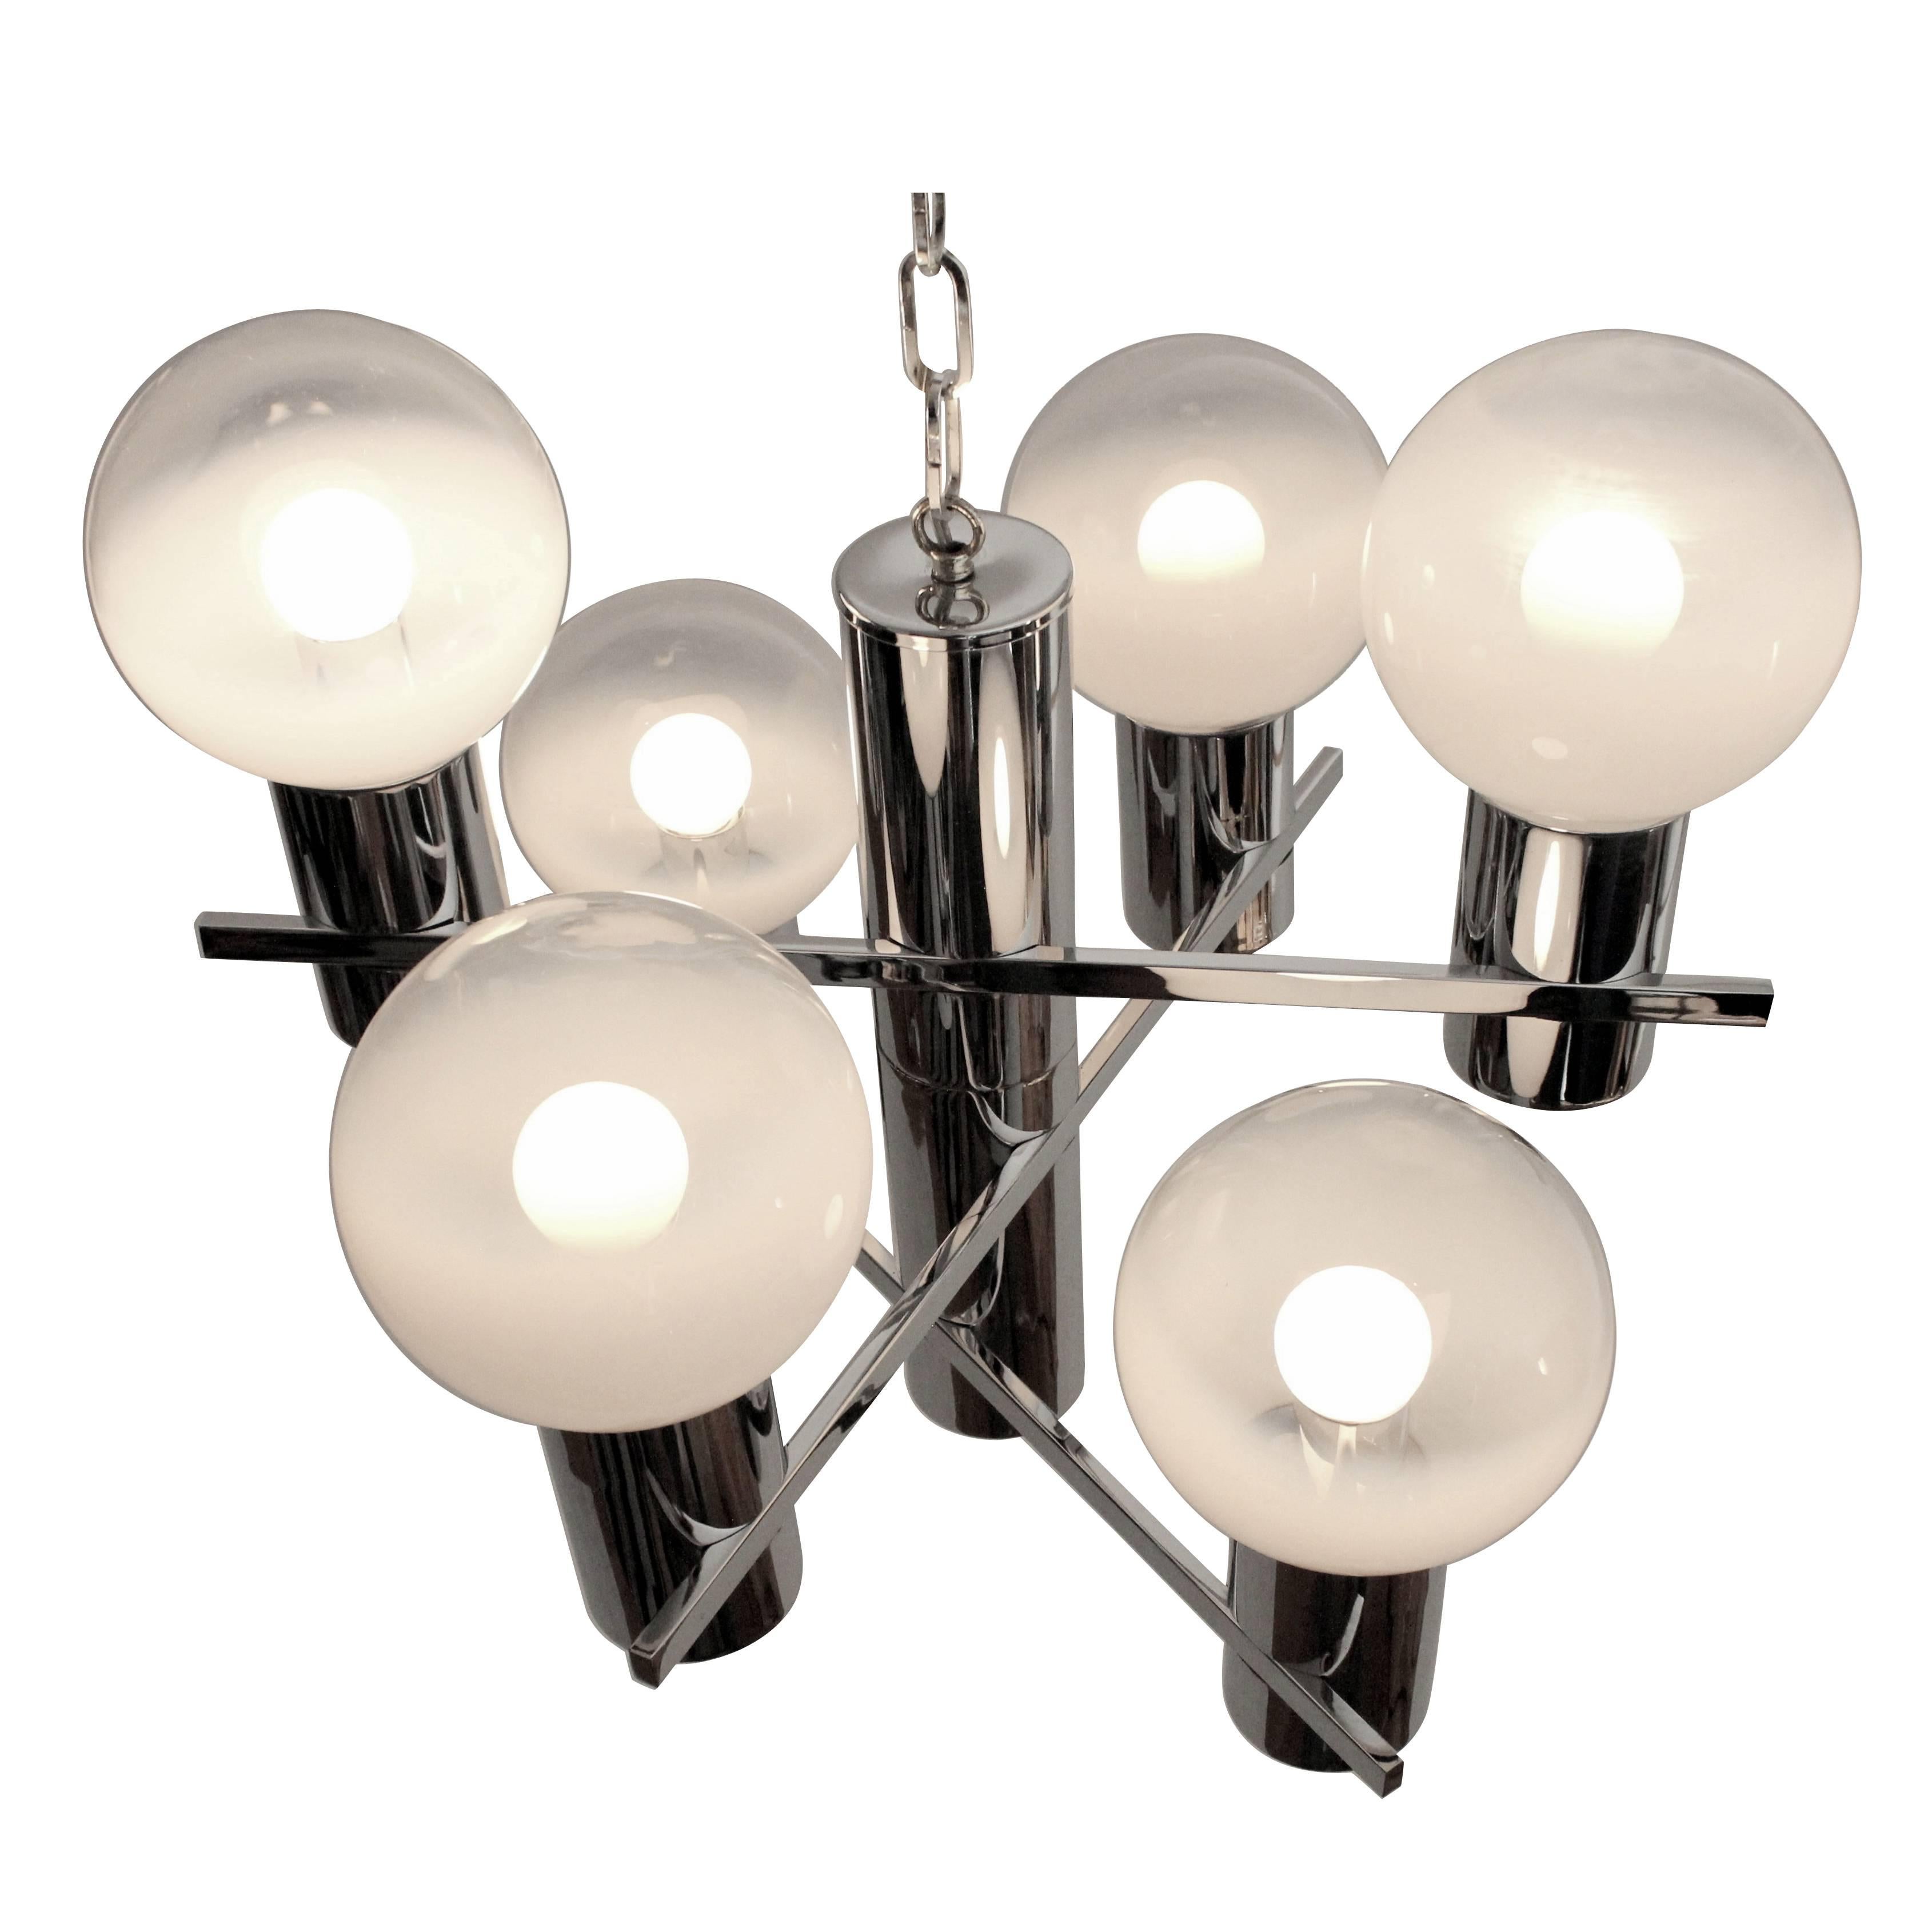 Asymetrical Chromed Six-Arm Chandelier in the Style of Sciolari/Mazzega, 1970s